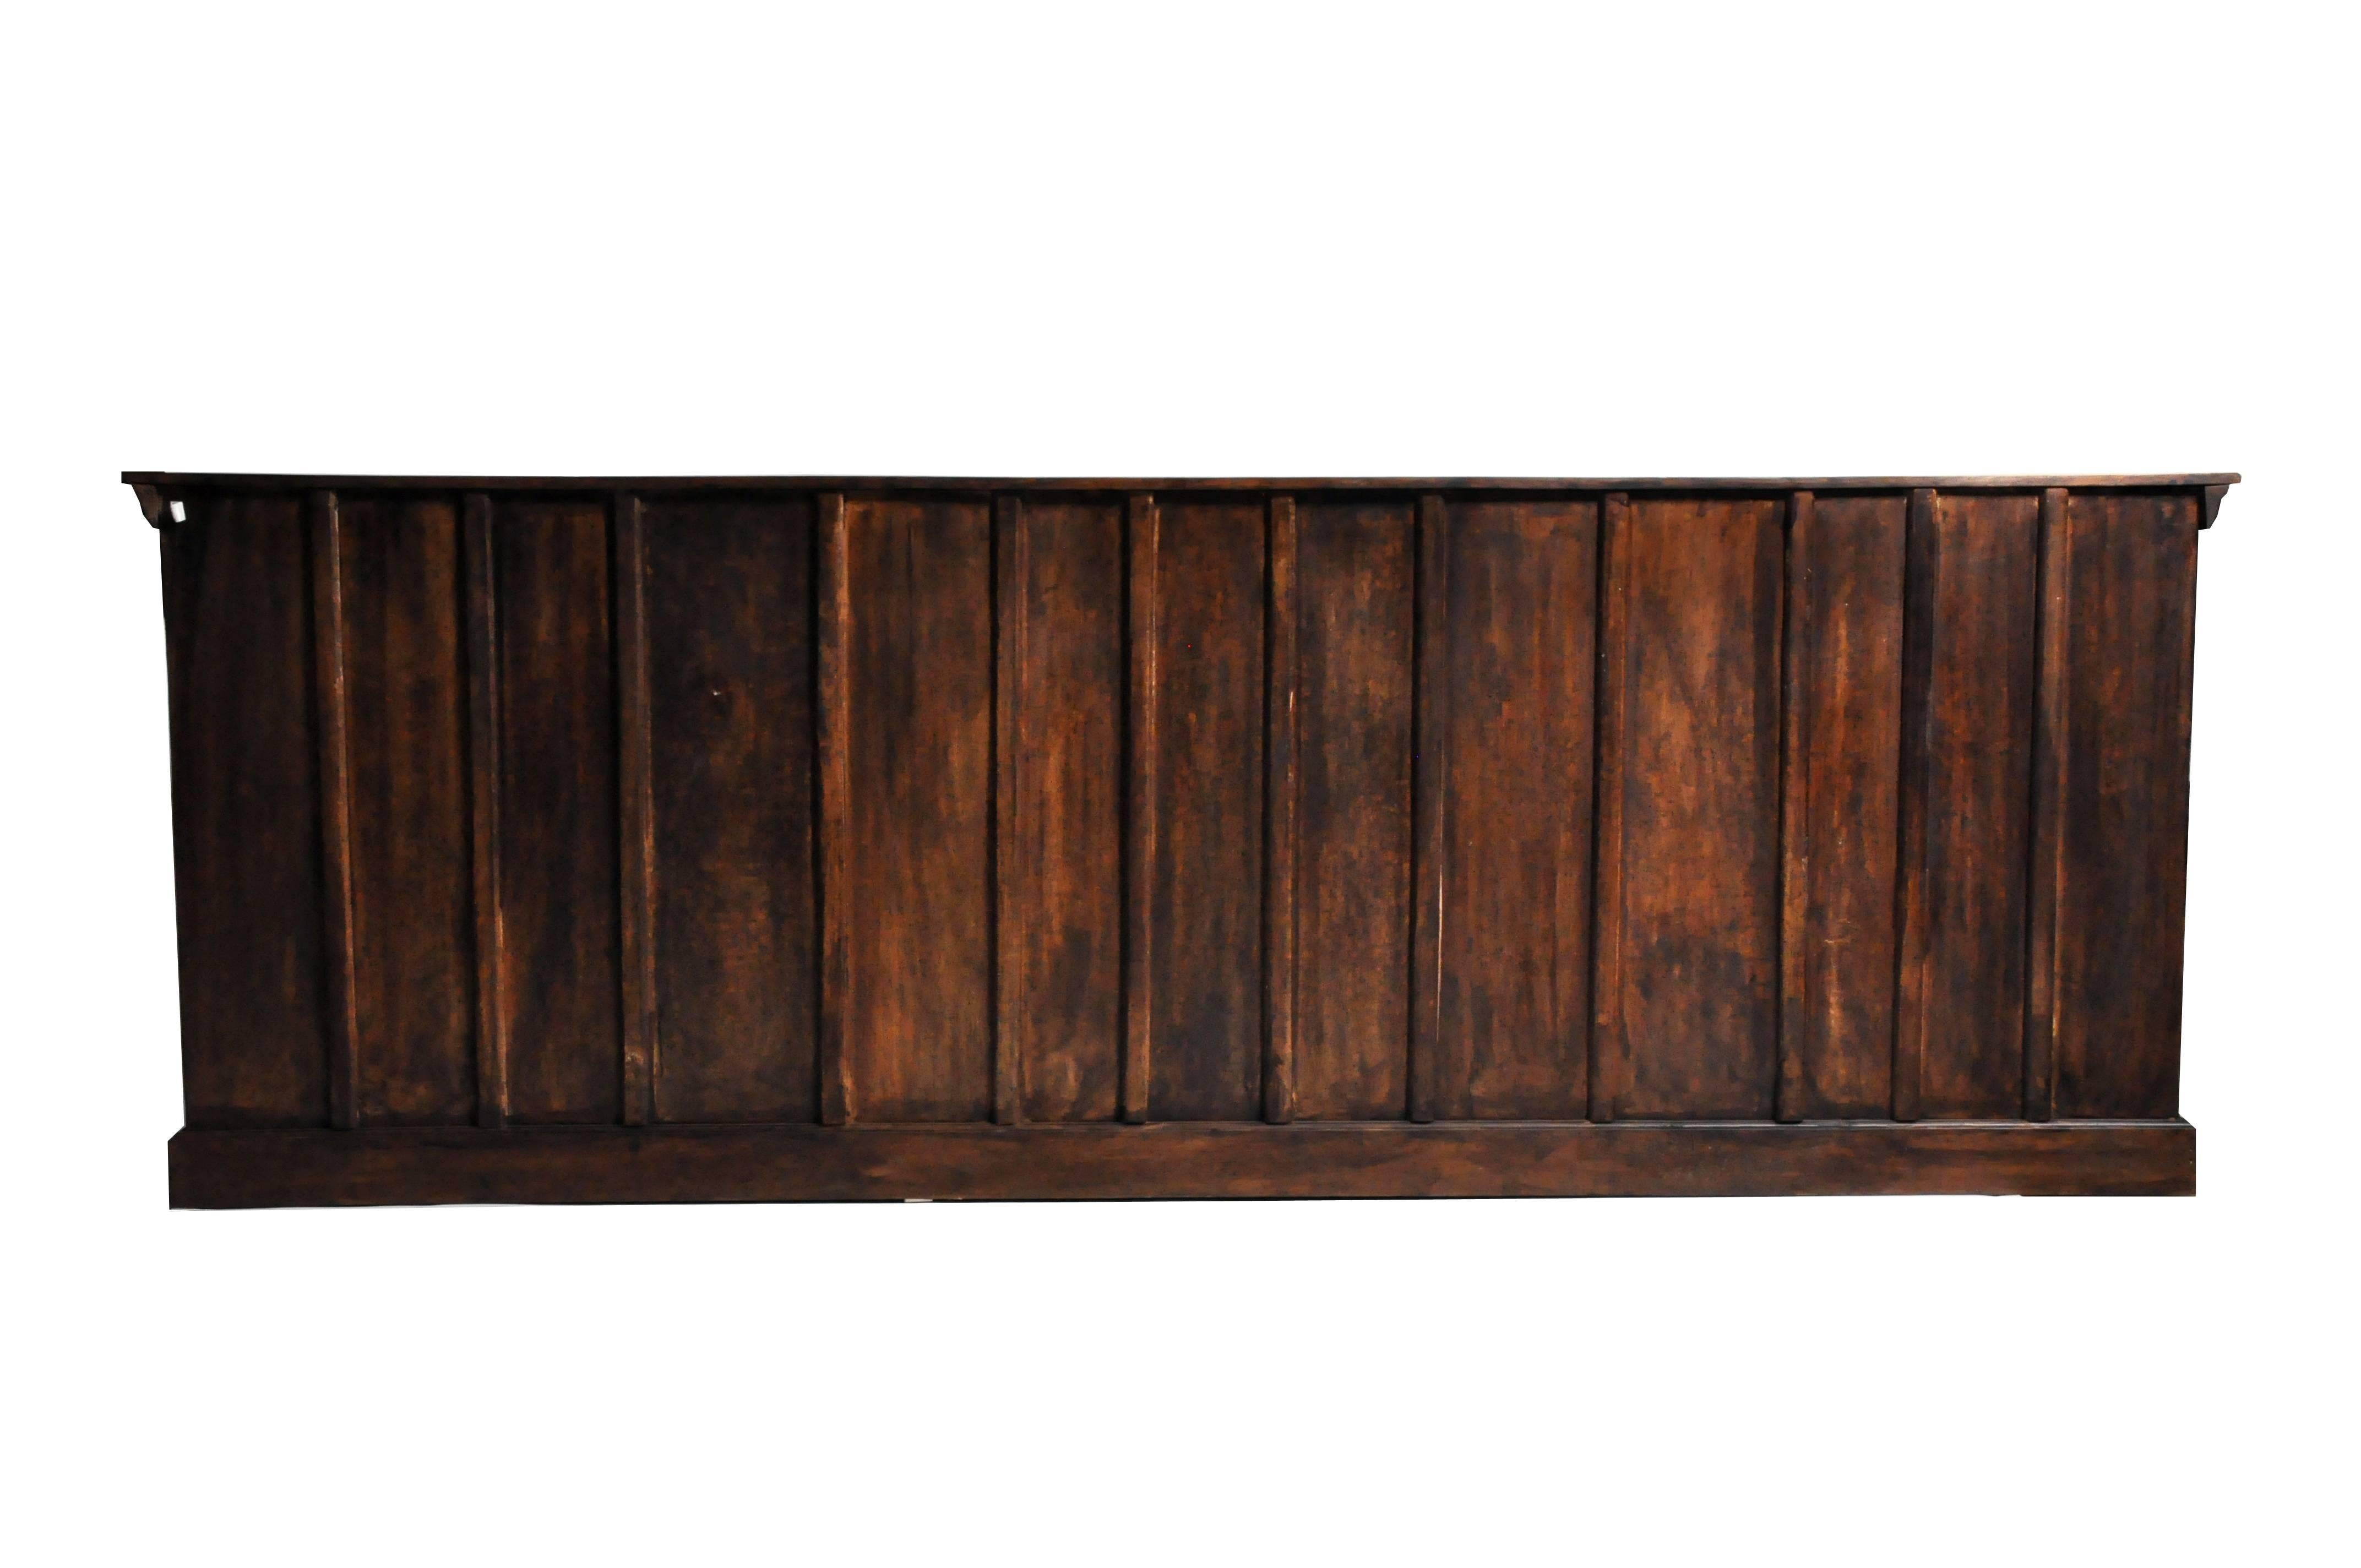 This impressive sideboard is from Jodhpur, India and made from hardwood, circa 1960. The piece features a beautiful patina and three pairs of doors that opens up to shelves for storage. Great accent piece to add to any room in your wonderful home.